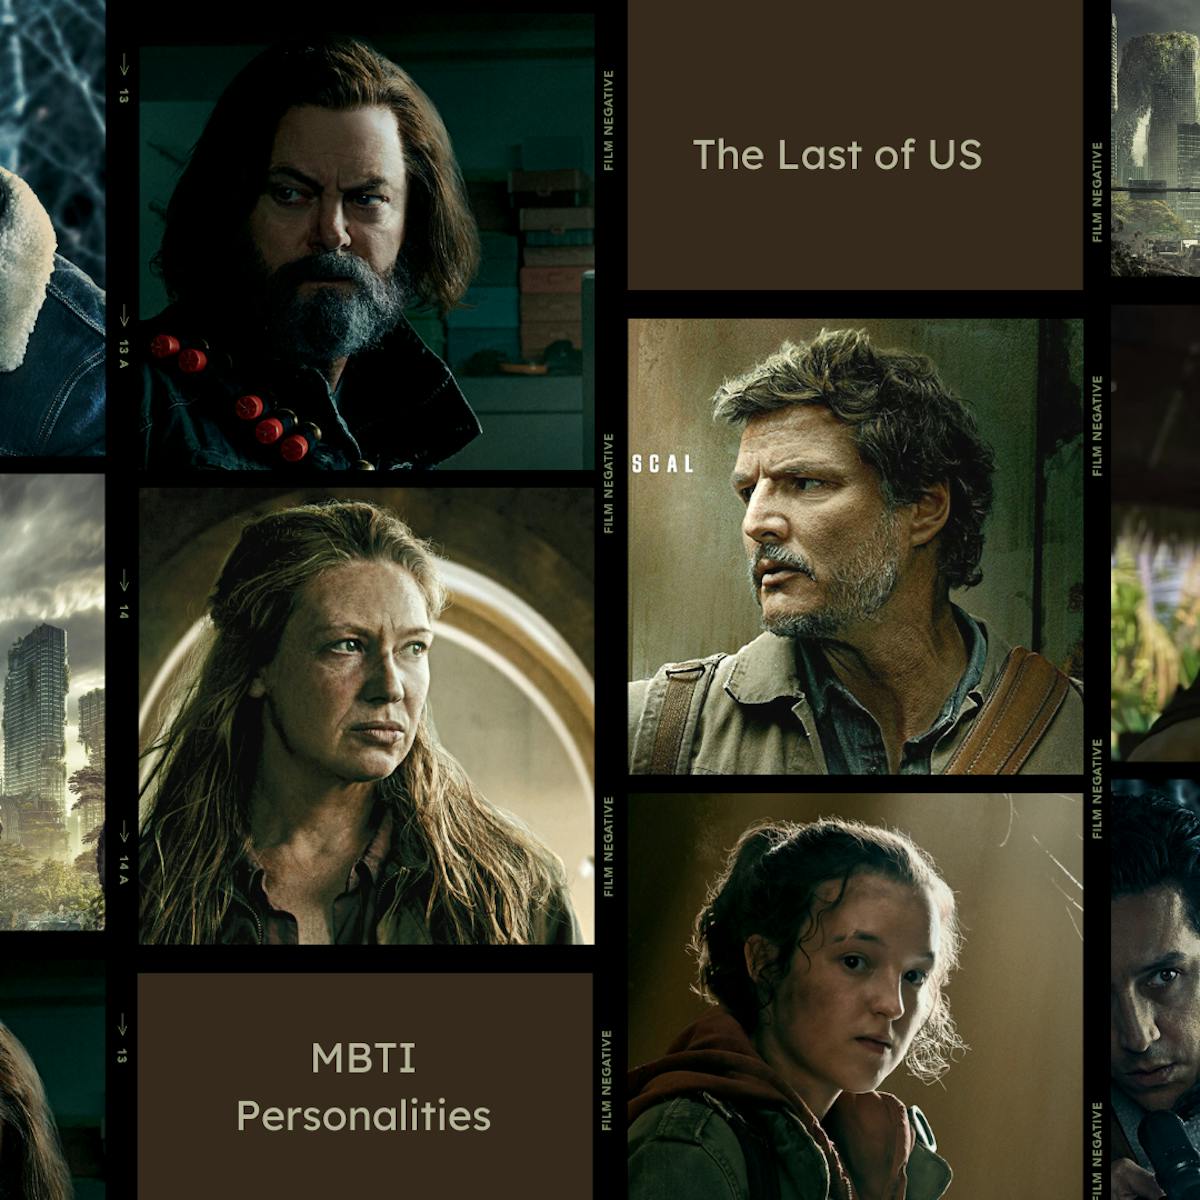 the last of us tv show character personality trait quiz according to the MBTI personality inventory